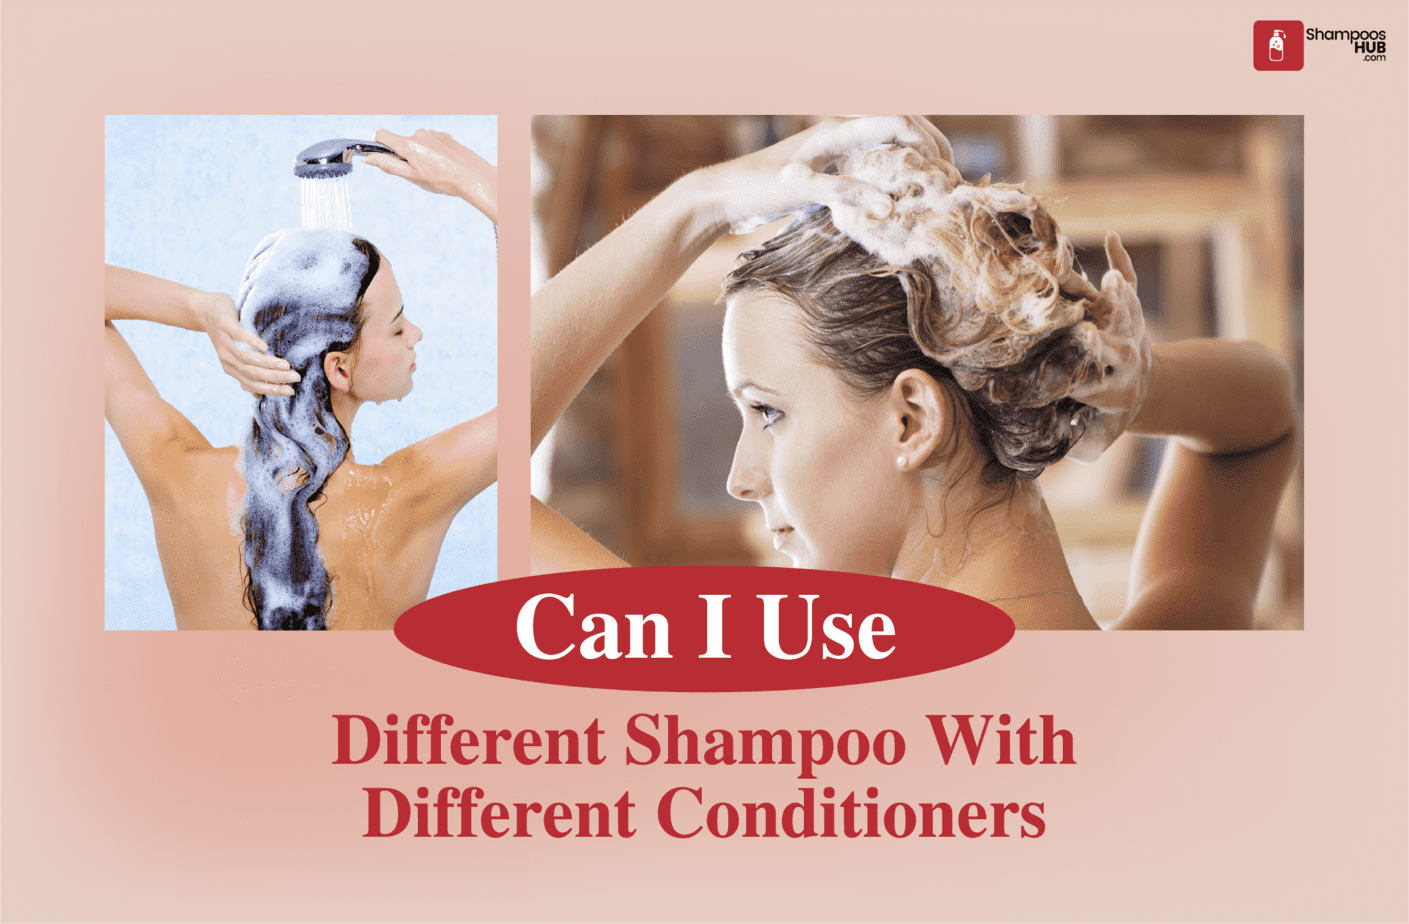 Can I Use Different Shampoo With Different Conditioners?